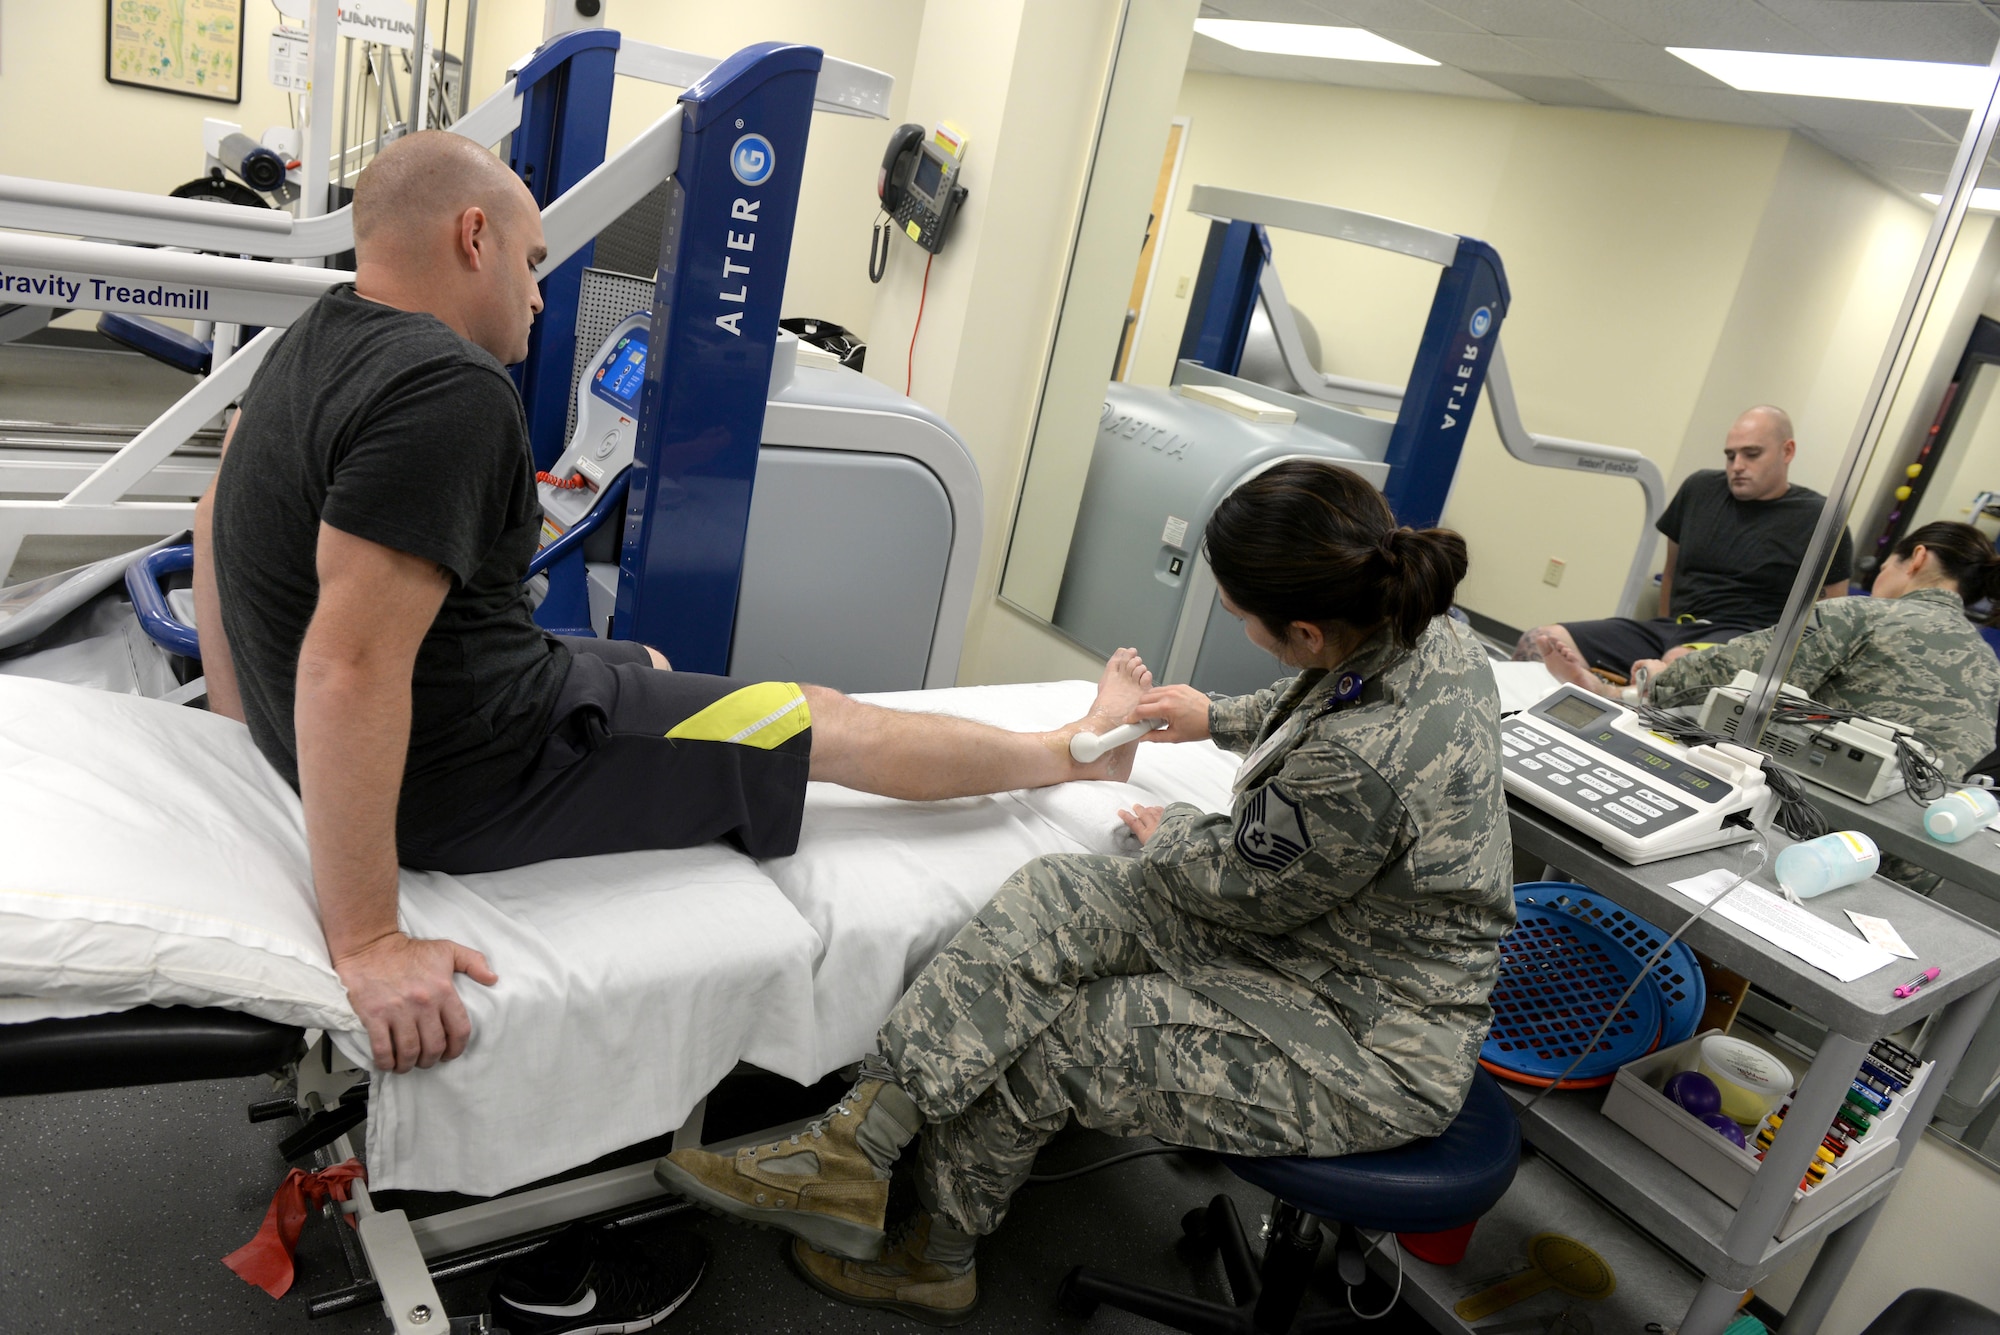 Master Sgt. Shannon Stoner, a 4th Medical Operations Squadron physical therapy technician, performs an ultrasound on Staff Sgt. Christopher Bonds, a 4th Equipment Maintenance Squadron engine mechanic, Nov. 18, 2015, at Seymour Johnson Air Force Base, North Carolina. In order to help patients properly, the base’s physical therapists must first diagnose the problem before providing suitable exercises to aid the healing process. (U.S. Air Force photo/Airman 1st Class Ashley Williamson)